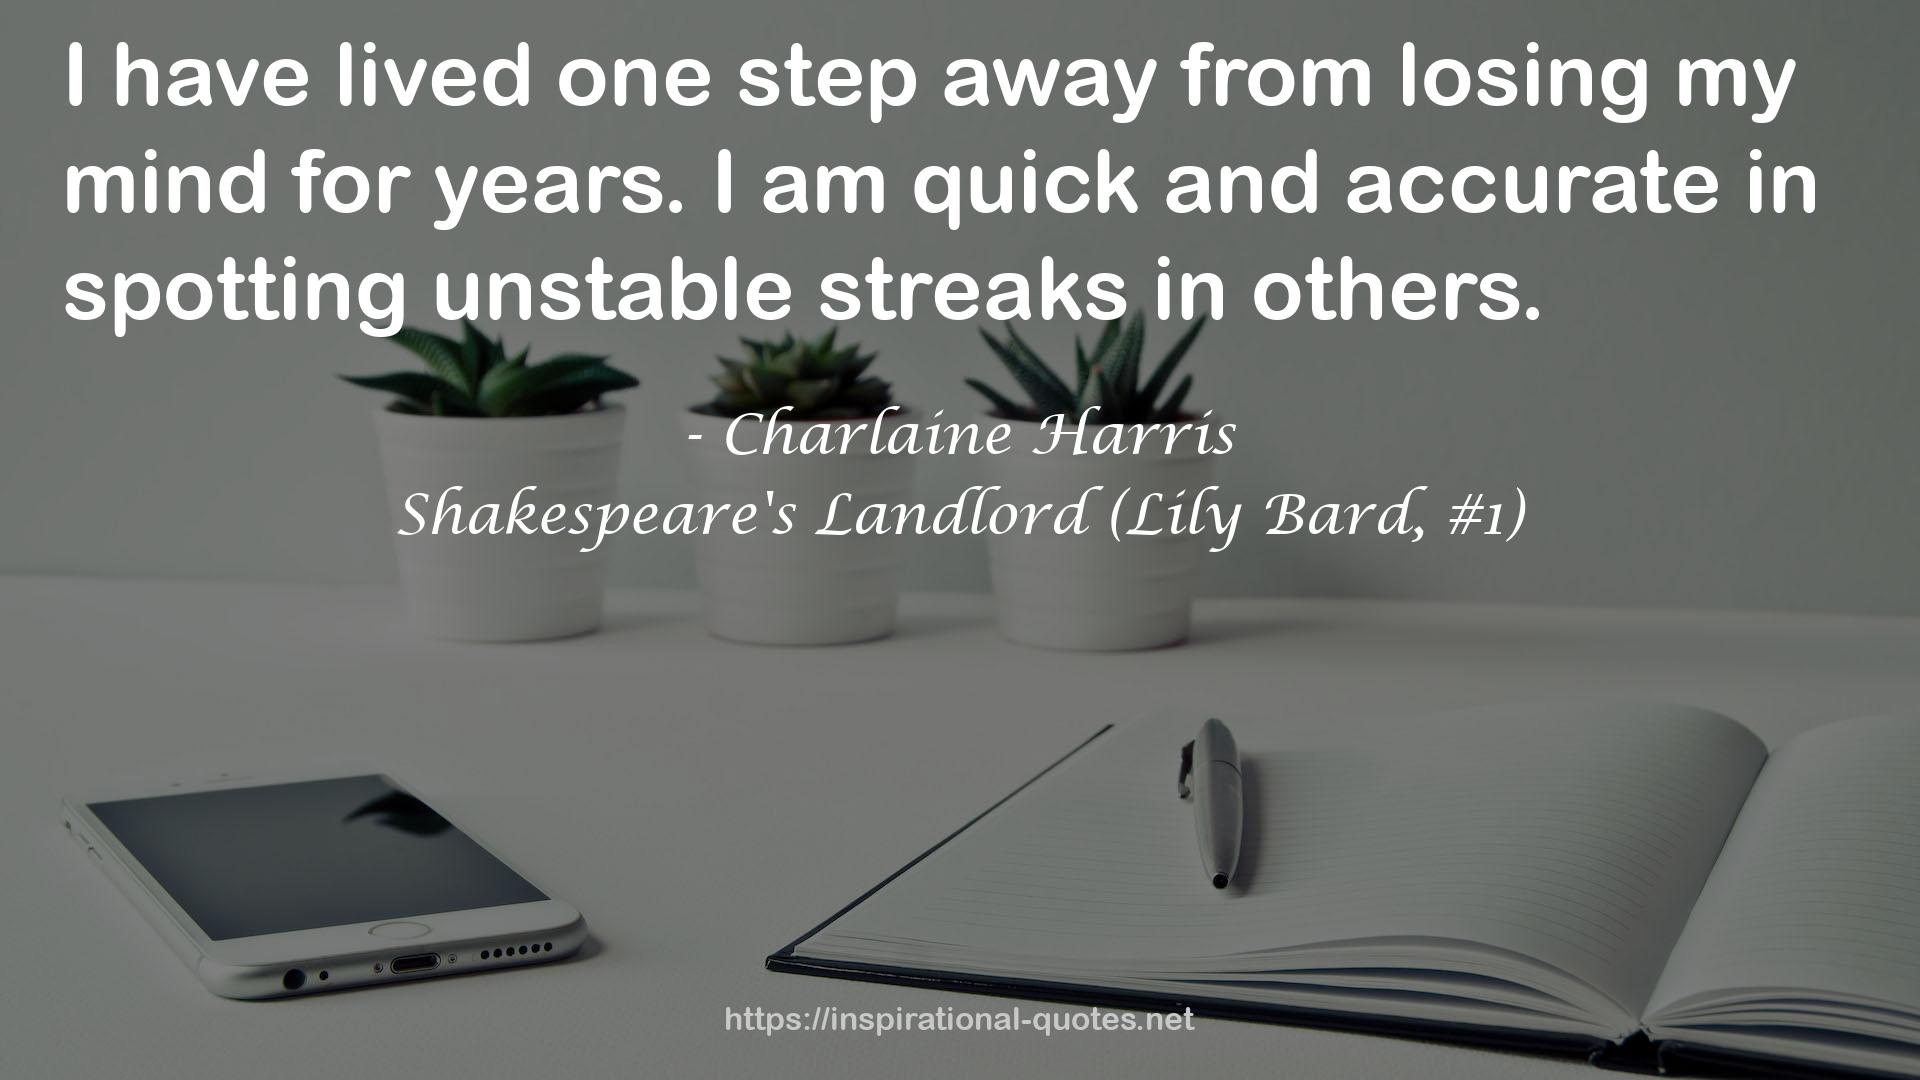 Shakespeare's Landlord (Lily Bard, #1) QUOTES